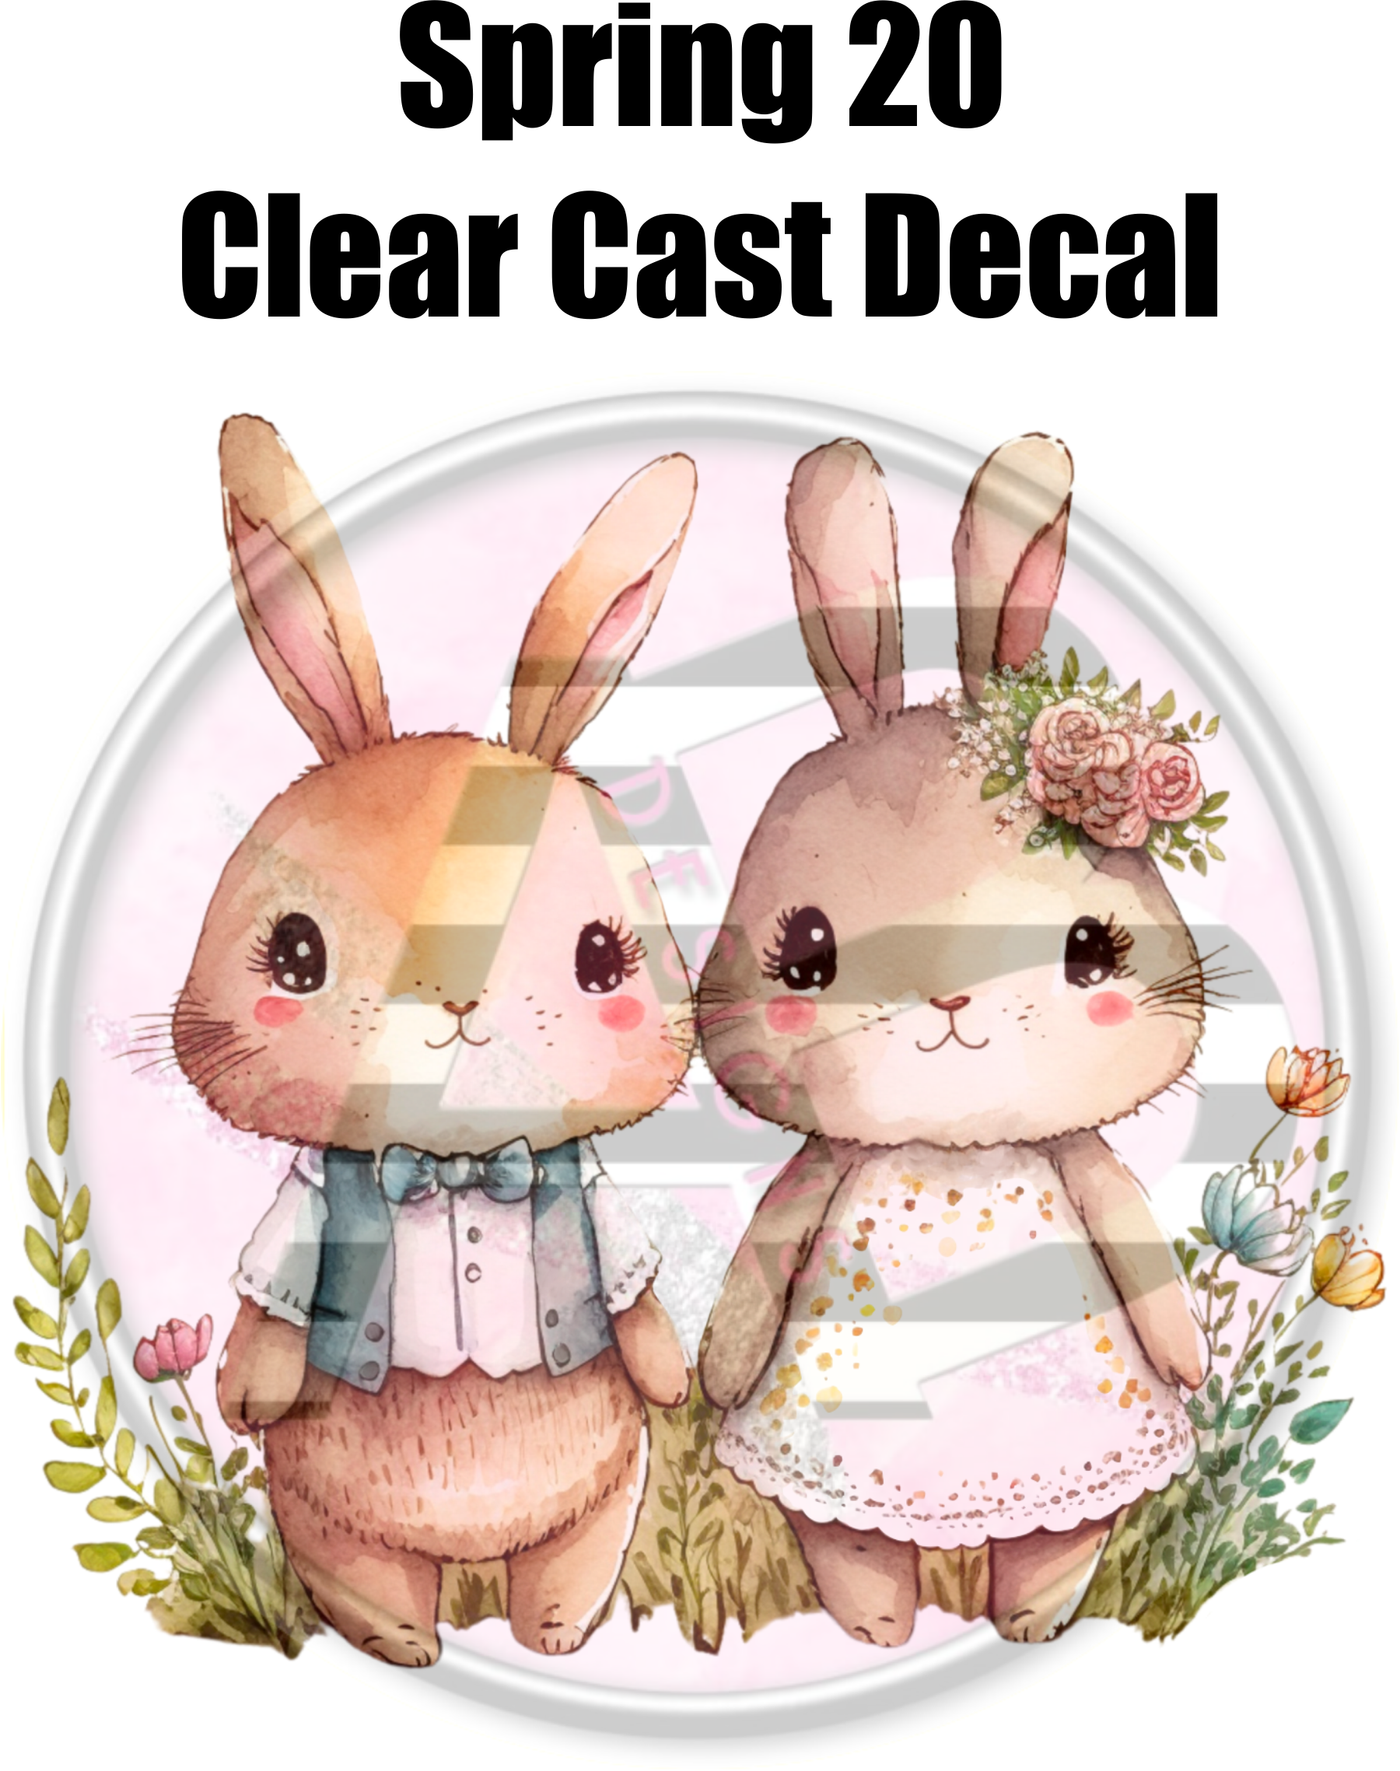 Spring 20 - Clear Cast Decal